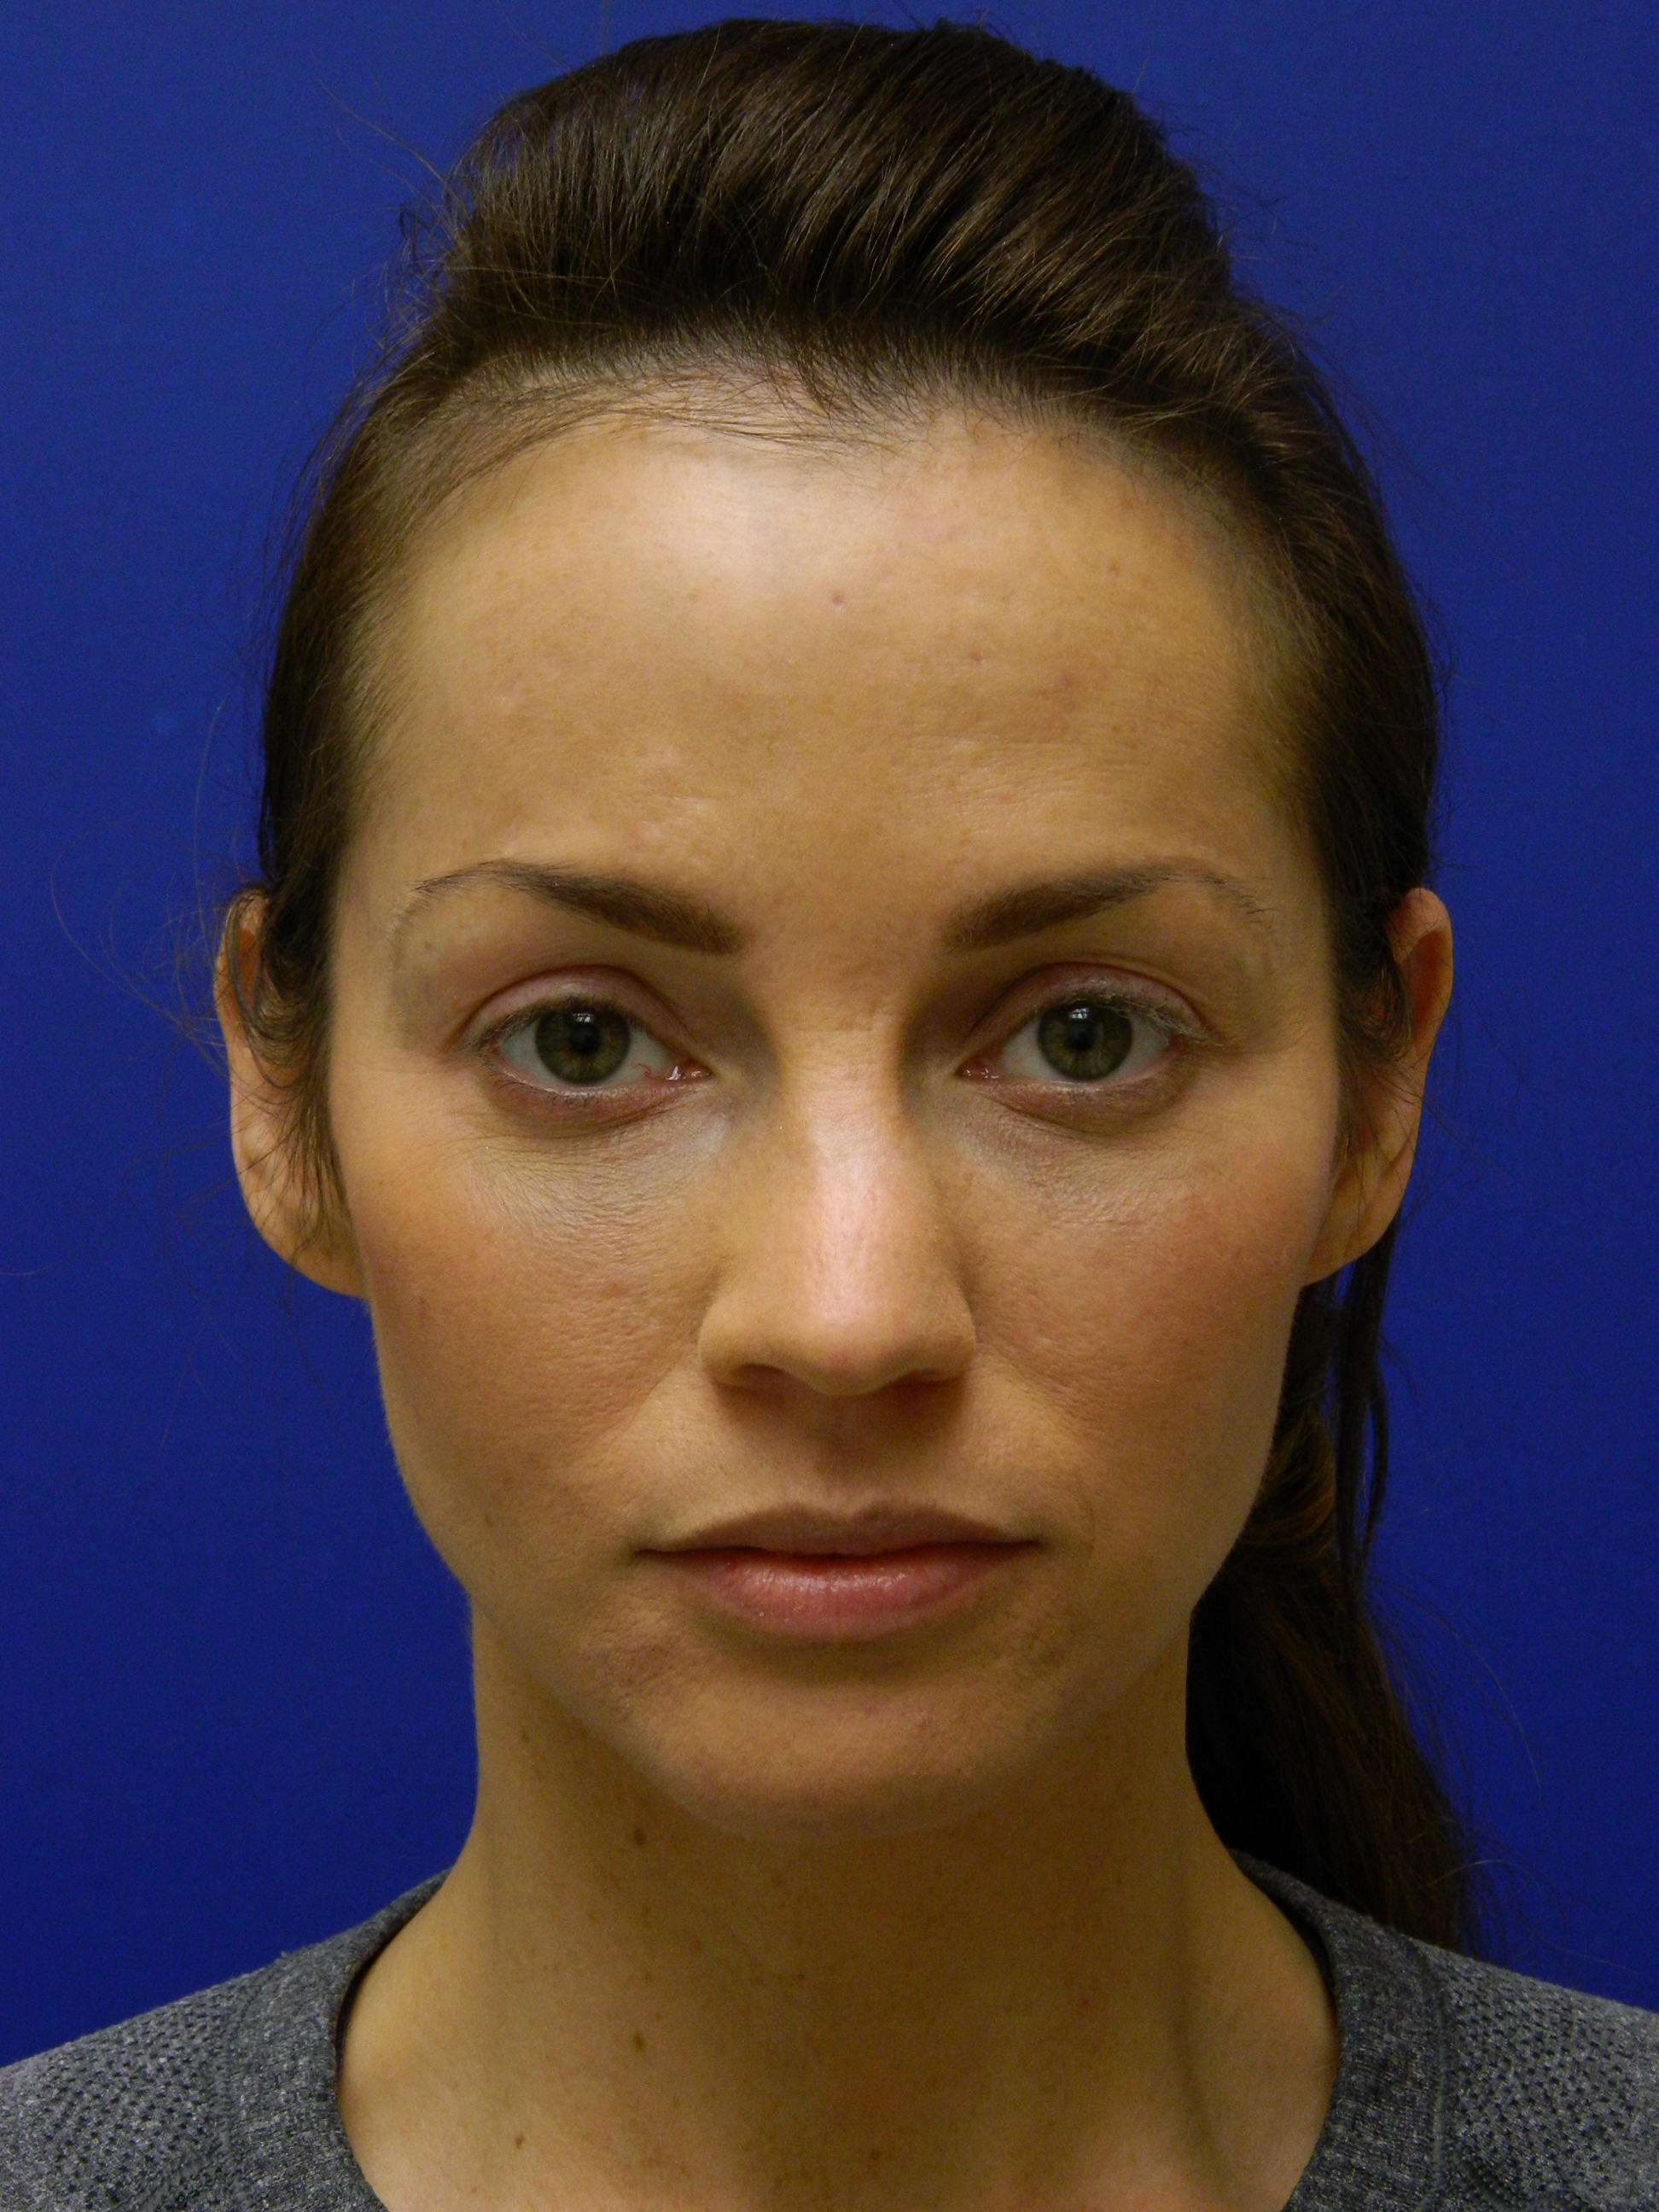 Before and after photos illustrate a stunning transformation by artistic facial plastic surgeon Dr. Paul Stanislaw that achieves a beautifully “natural” no makeup look.